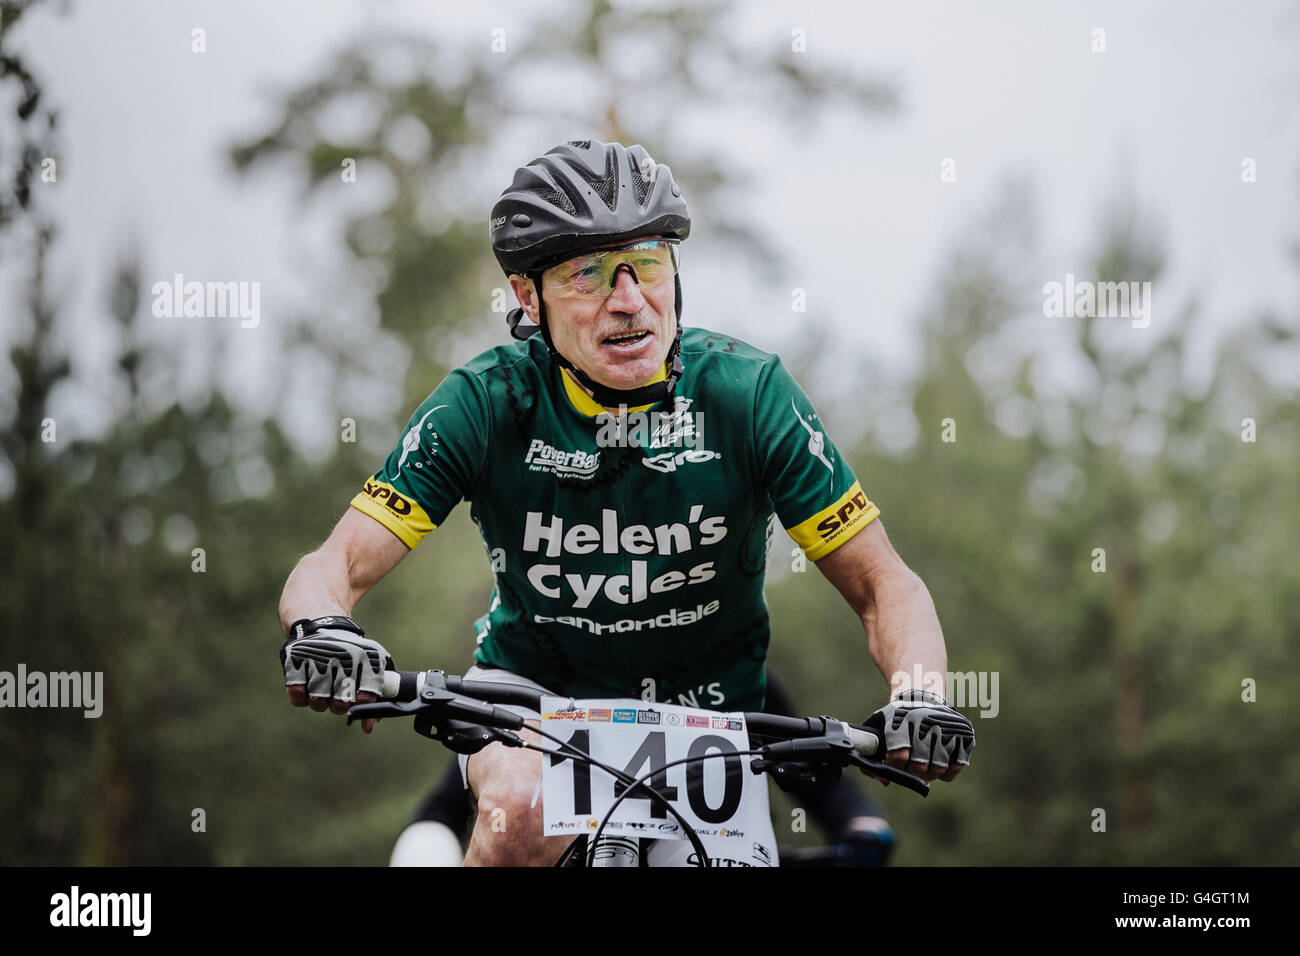 closeup of face of an old male cyclist athlete during cross-country race 'New energy' Stock Photo